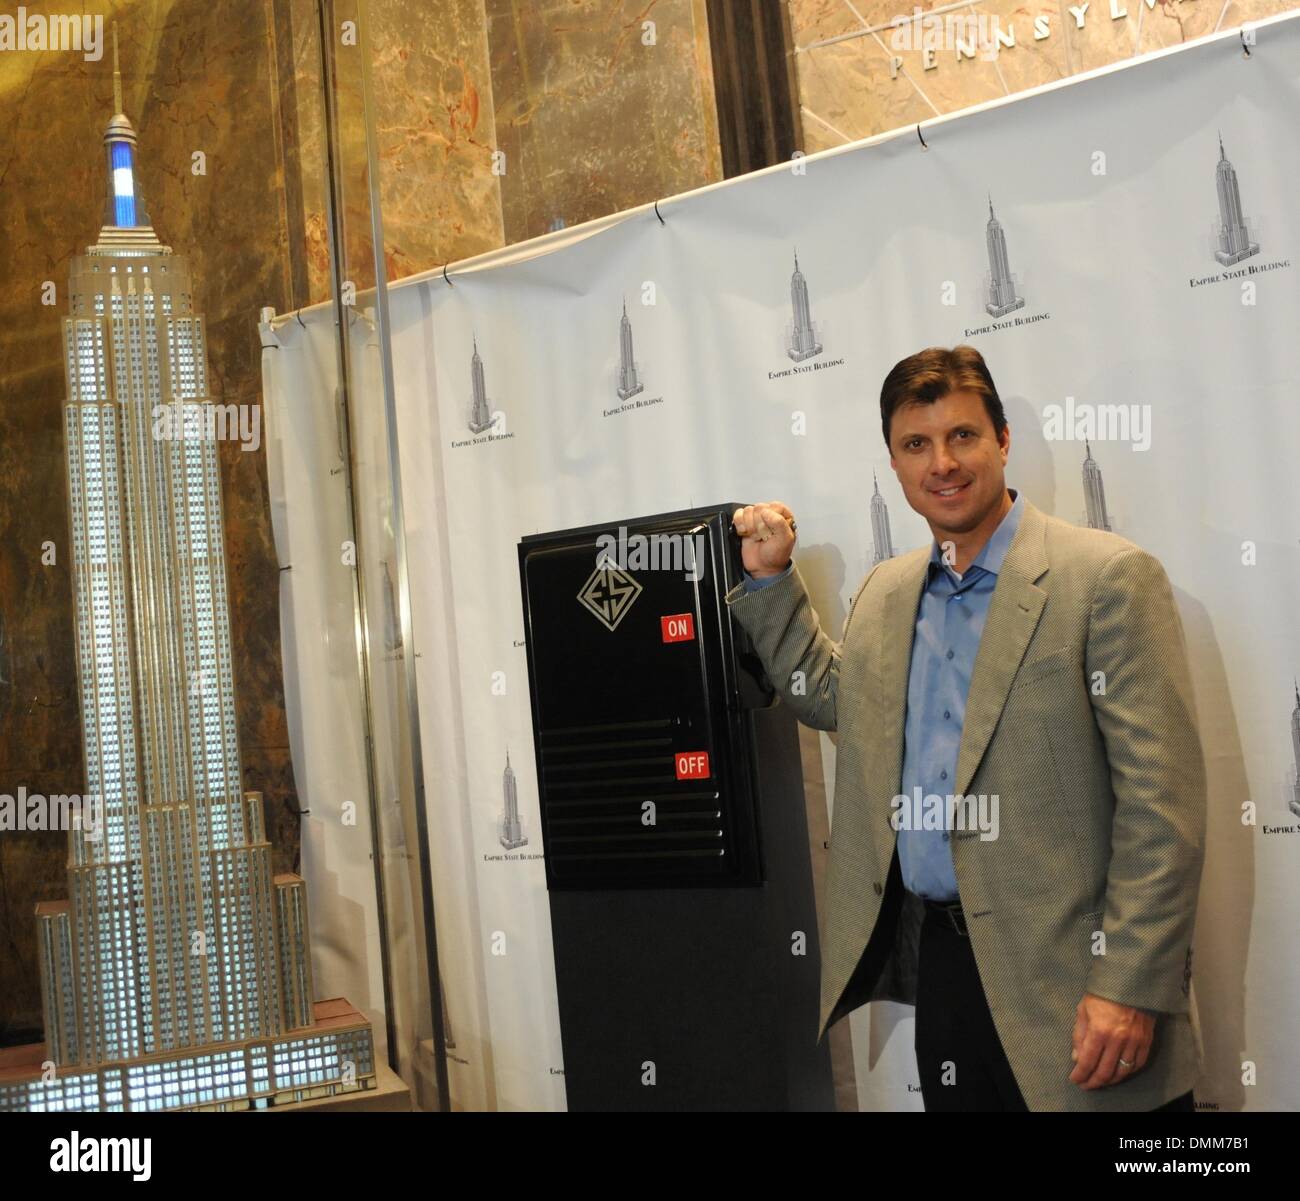 Nov 04, 2009 - Manhattan, New York, USA - New York Yankee great and four-time World Series champion TINO MARTINEZ lights and tours the Empire State Building to wish the Bronx Bombers good and celebrate the playing of Game 6 against the Philadelphia Phillies at Yankee Stadium tonight.  (Credit Image: Â© Bryan Smith/ZUMA Press) RESTRICTIONS:  * New York City Newspapers Rights OUT * Stock Photo